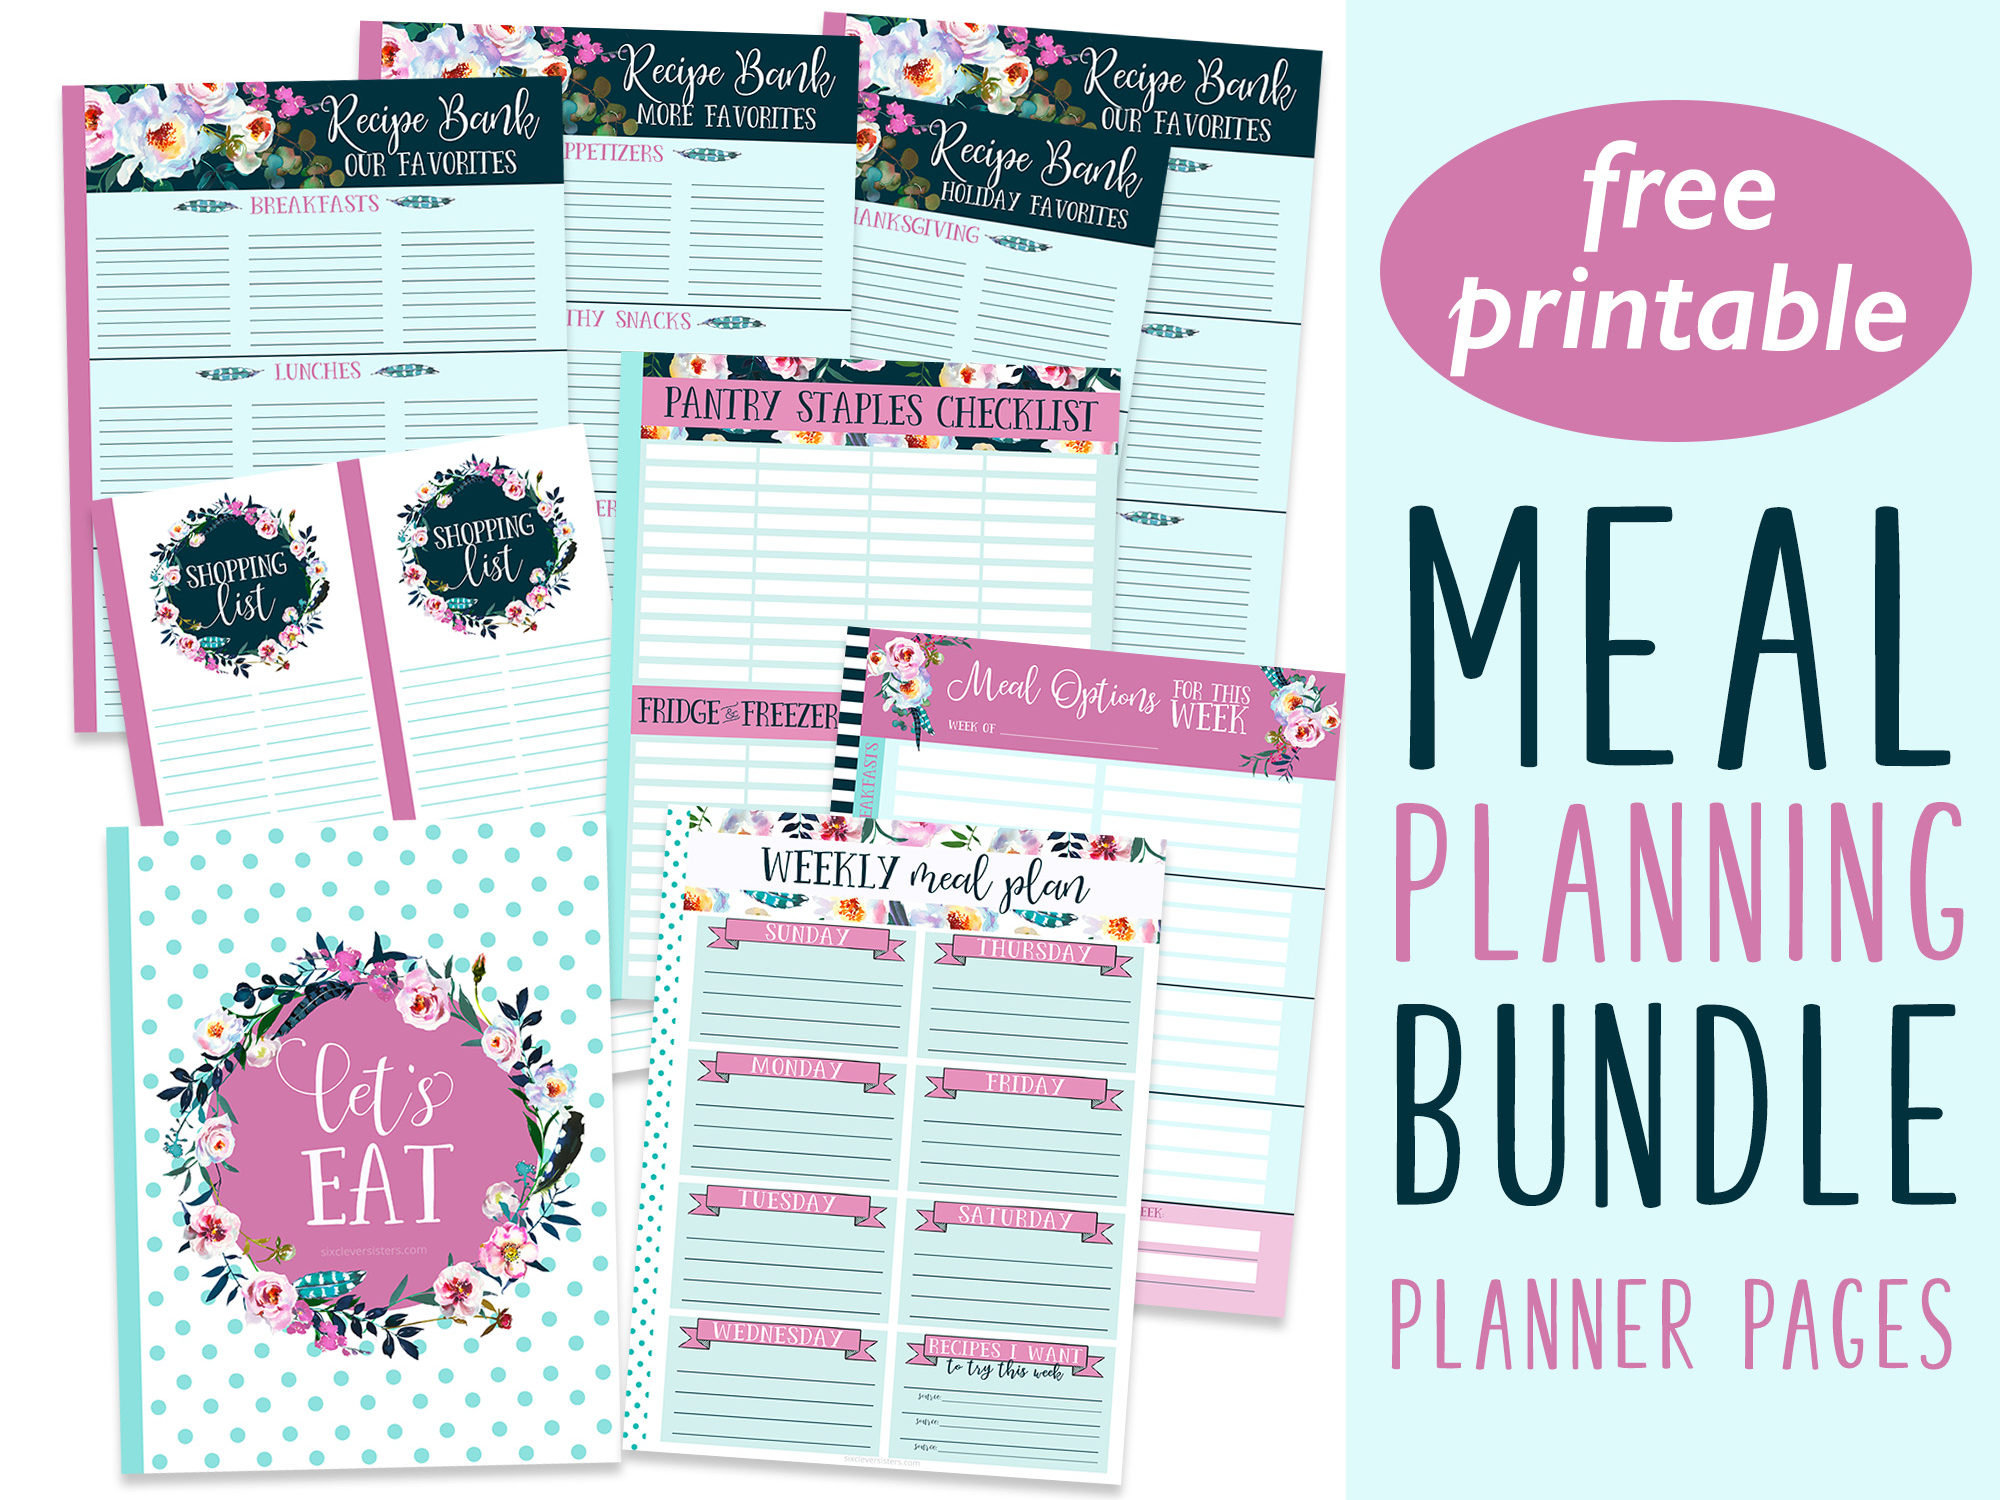 Printable Meal Planner Pages Bundle - Six Clever Sisters